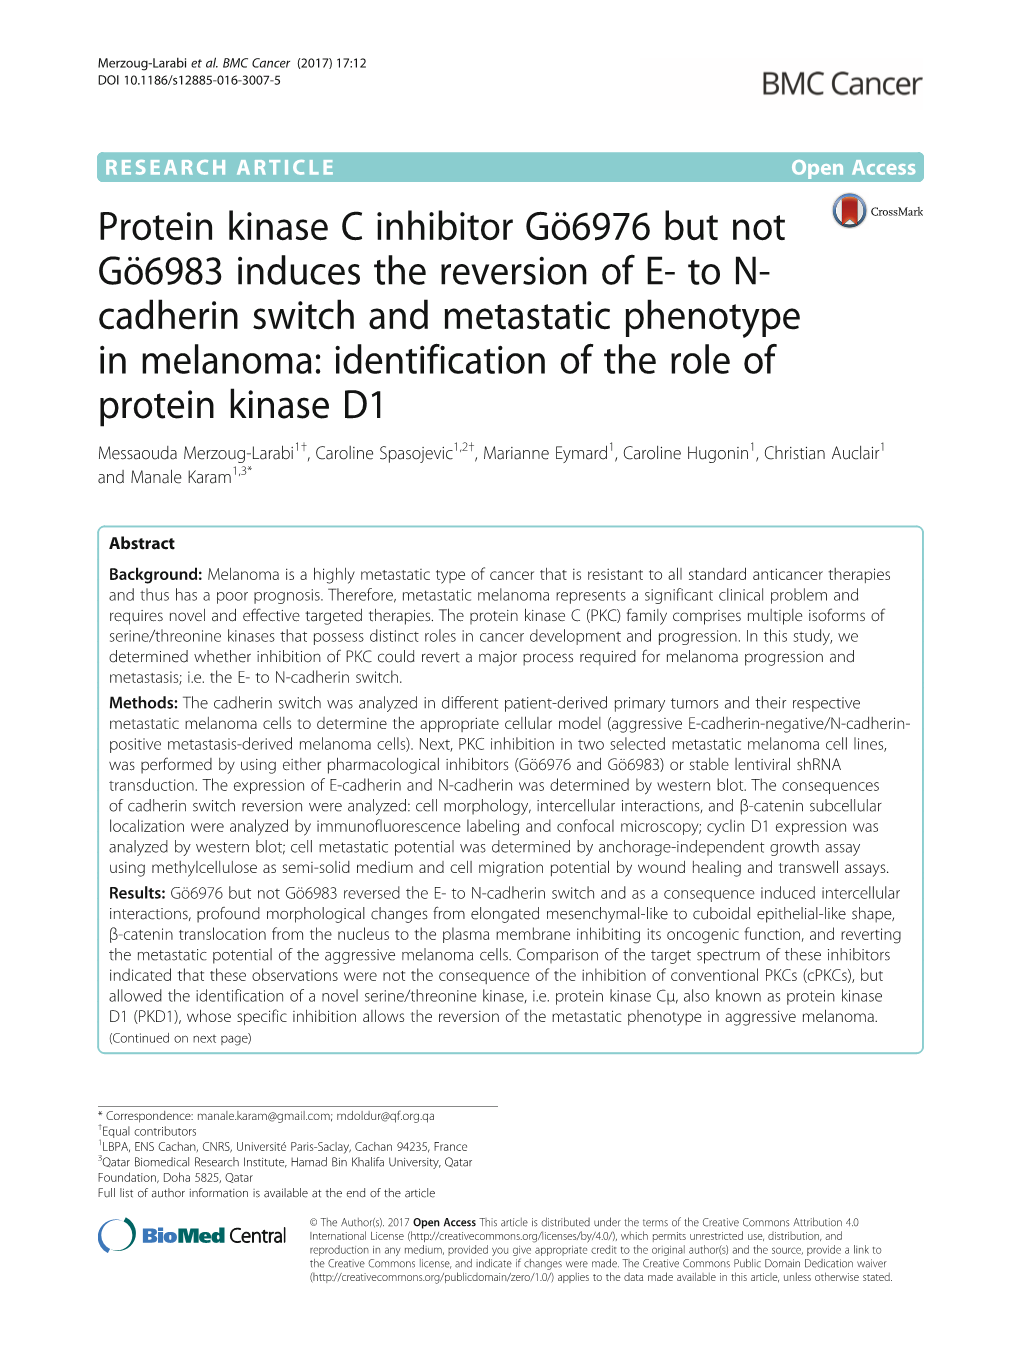 Protein Kinase C Inhibitor Gö6976 but Not Gö6983 Induces the Reversion